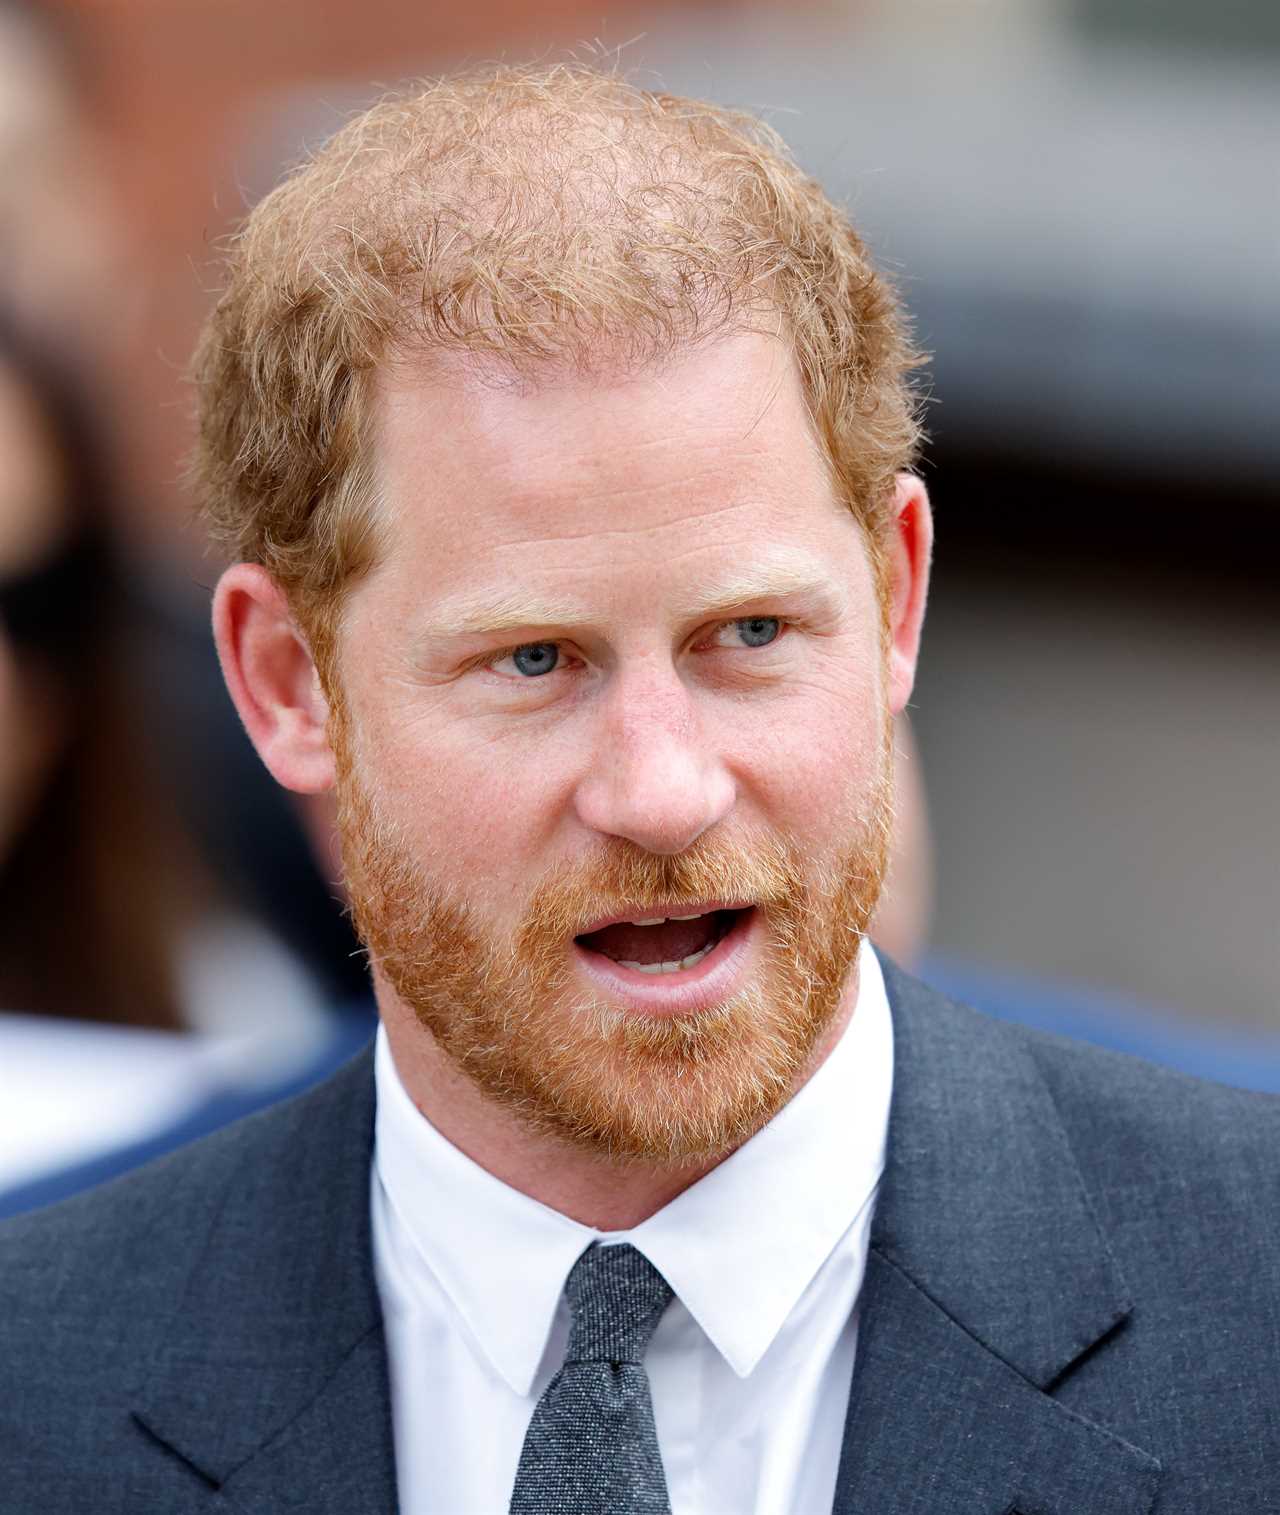 Most redheads don’t love their locks until their 20s, study finds – & ginger icons like Prince Harry reduce the stigma